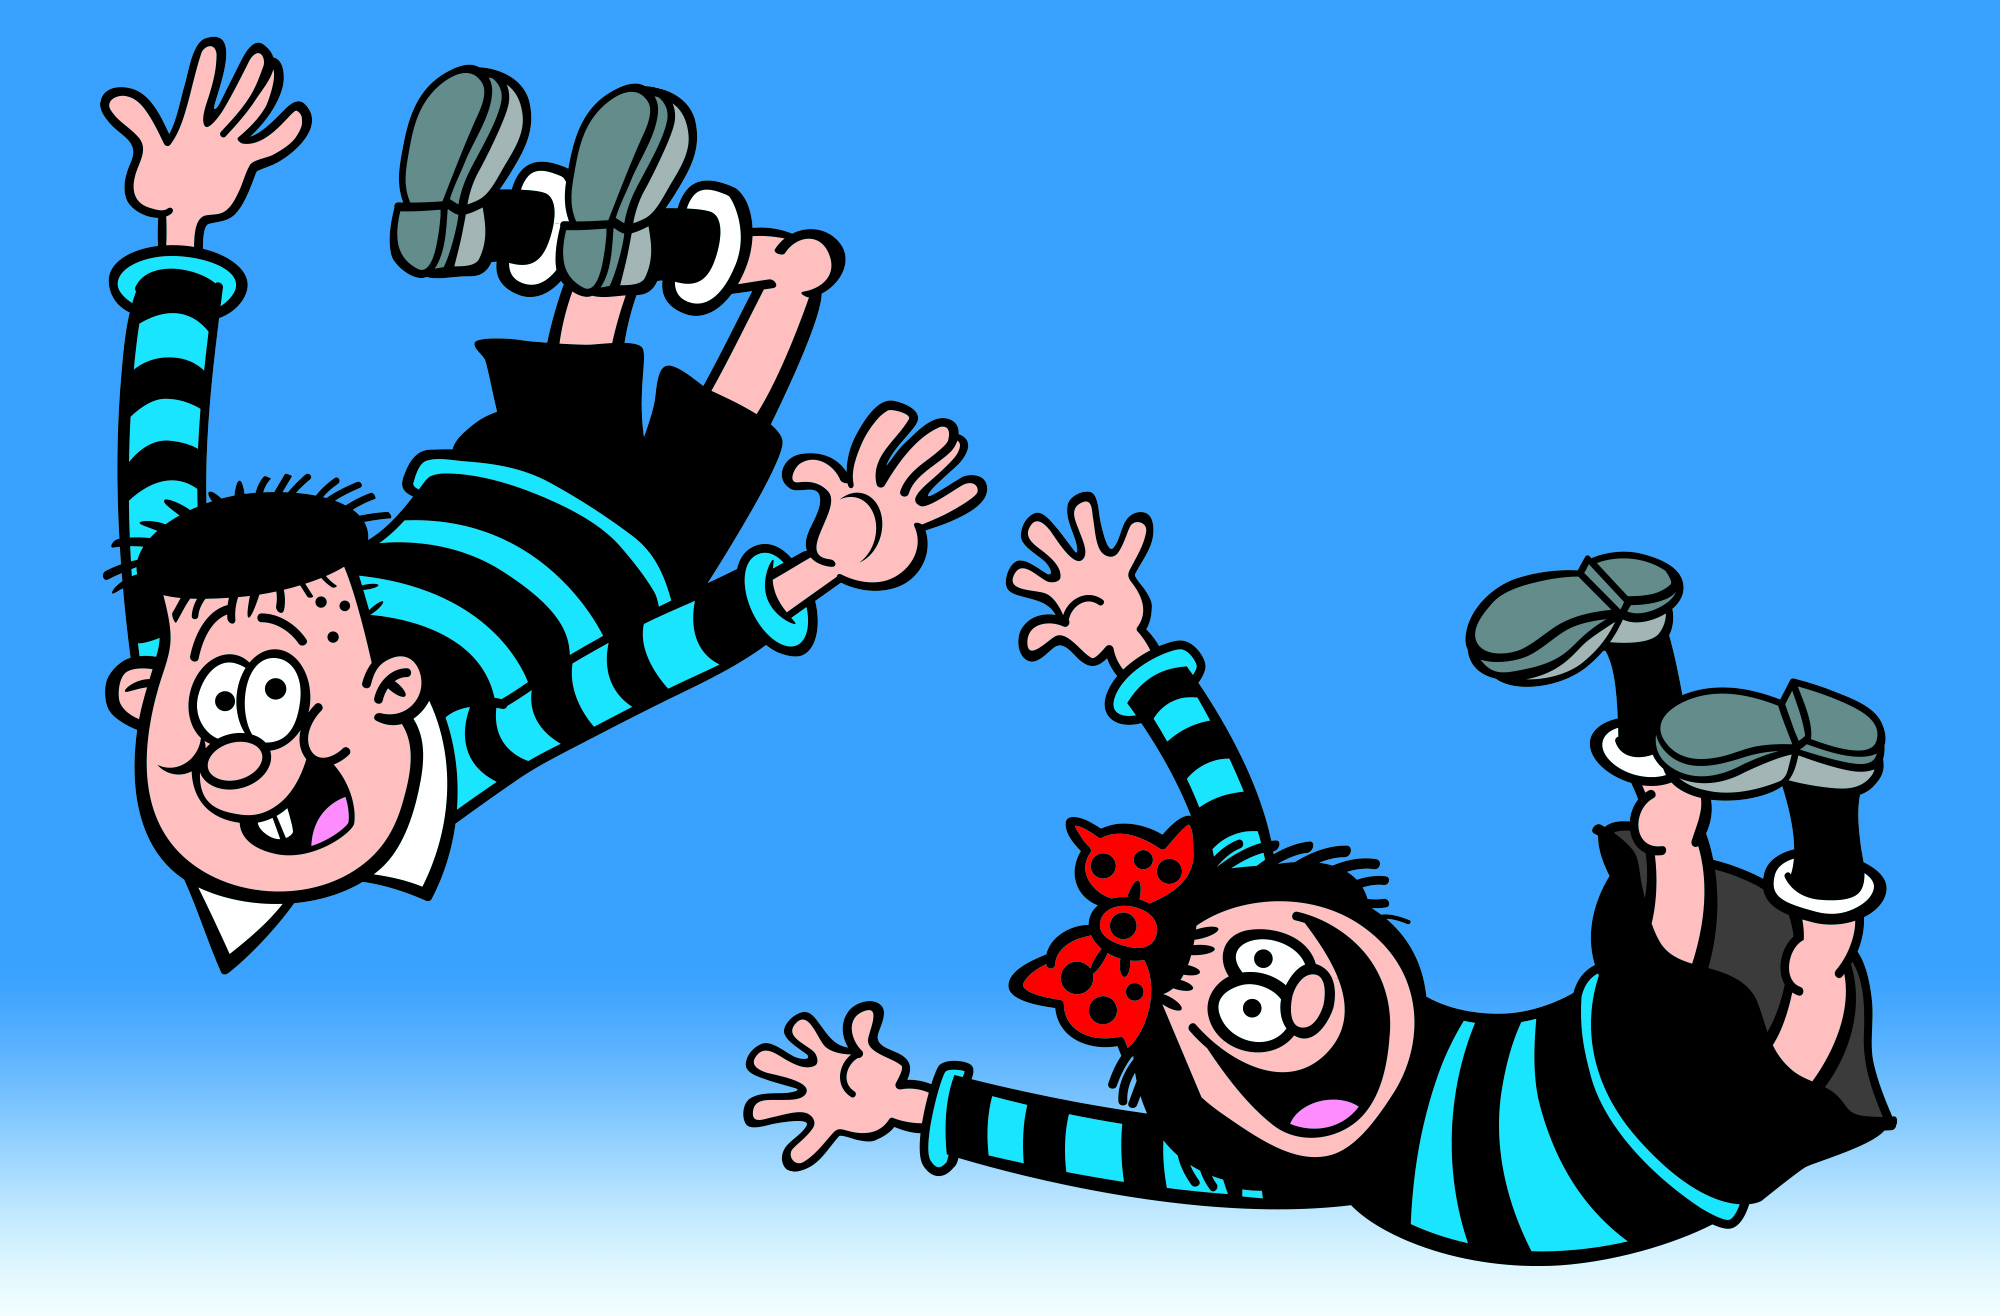 Sidney and Toots from the Bash Street Kids